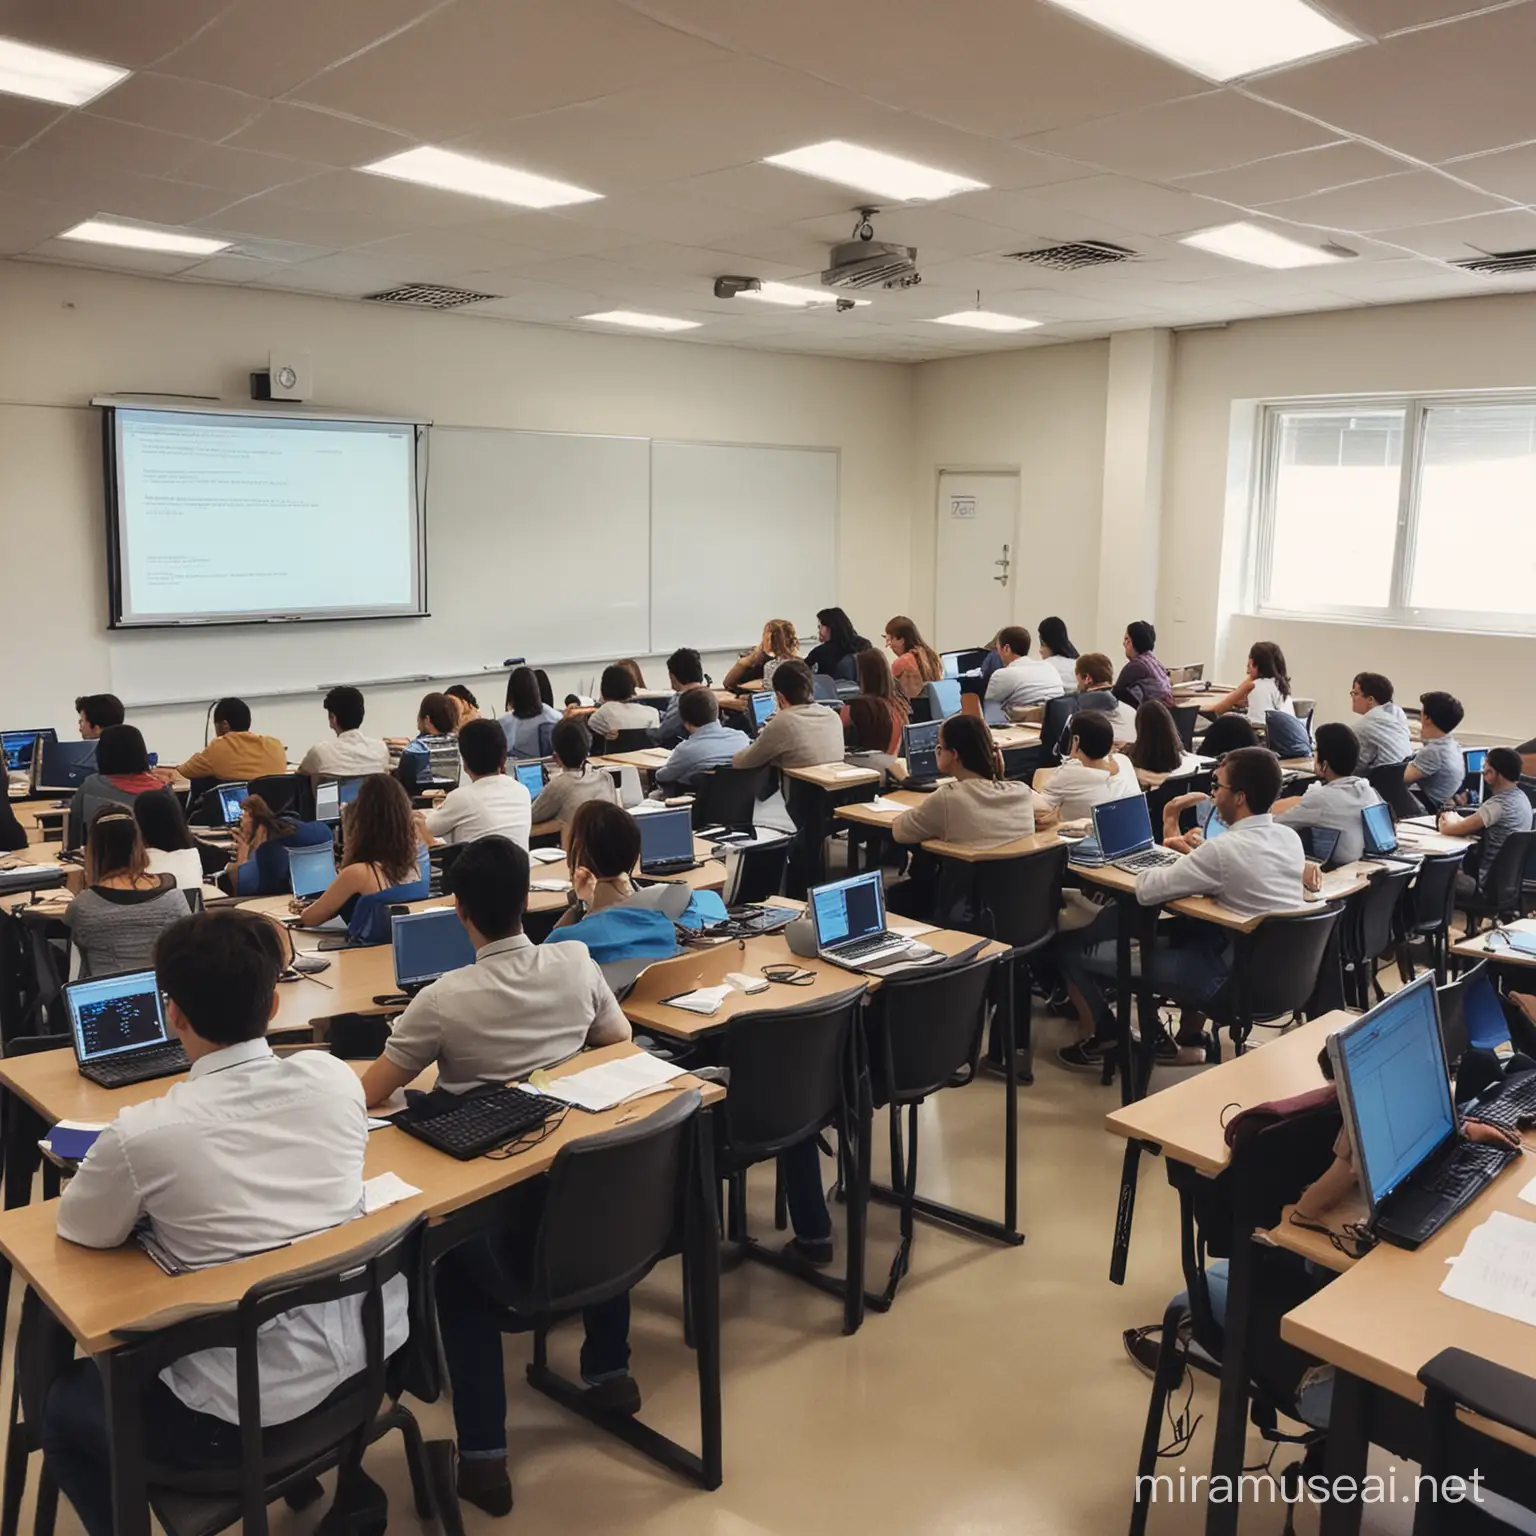 I want a photo of the university class where the professor is teaching about software at the doctoral level. I want the photo to be from a student's point of view, which means that you are sitting in class and watching the professor's teaching